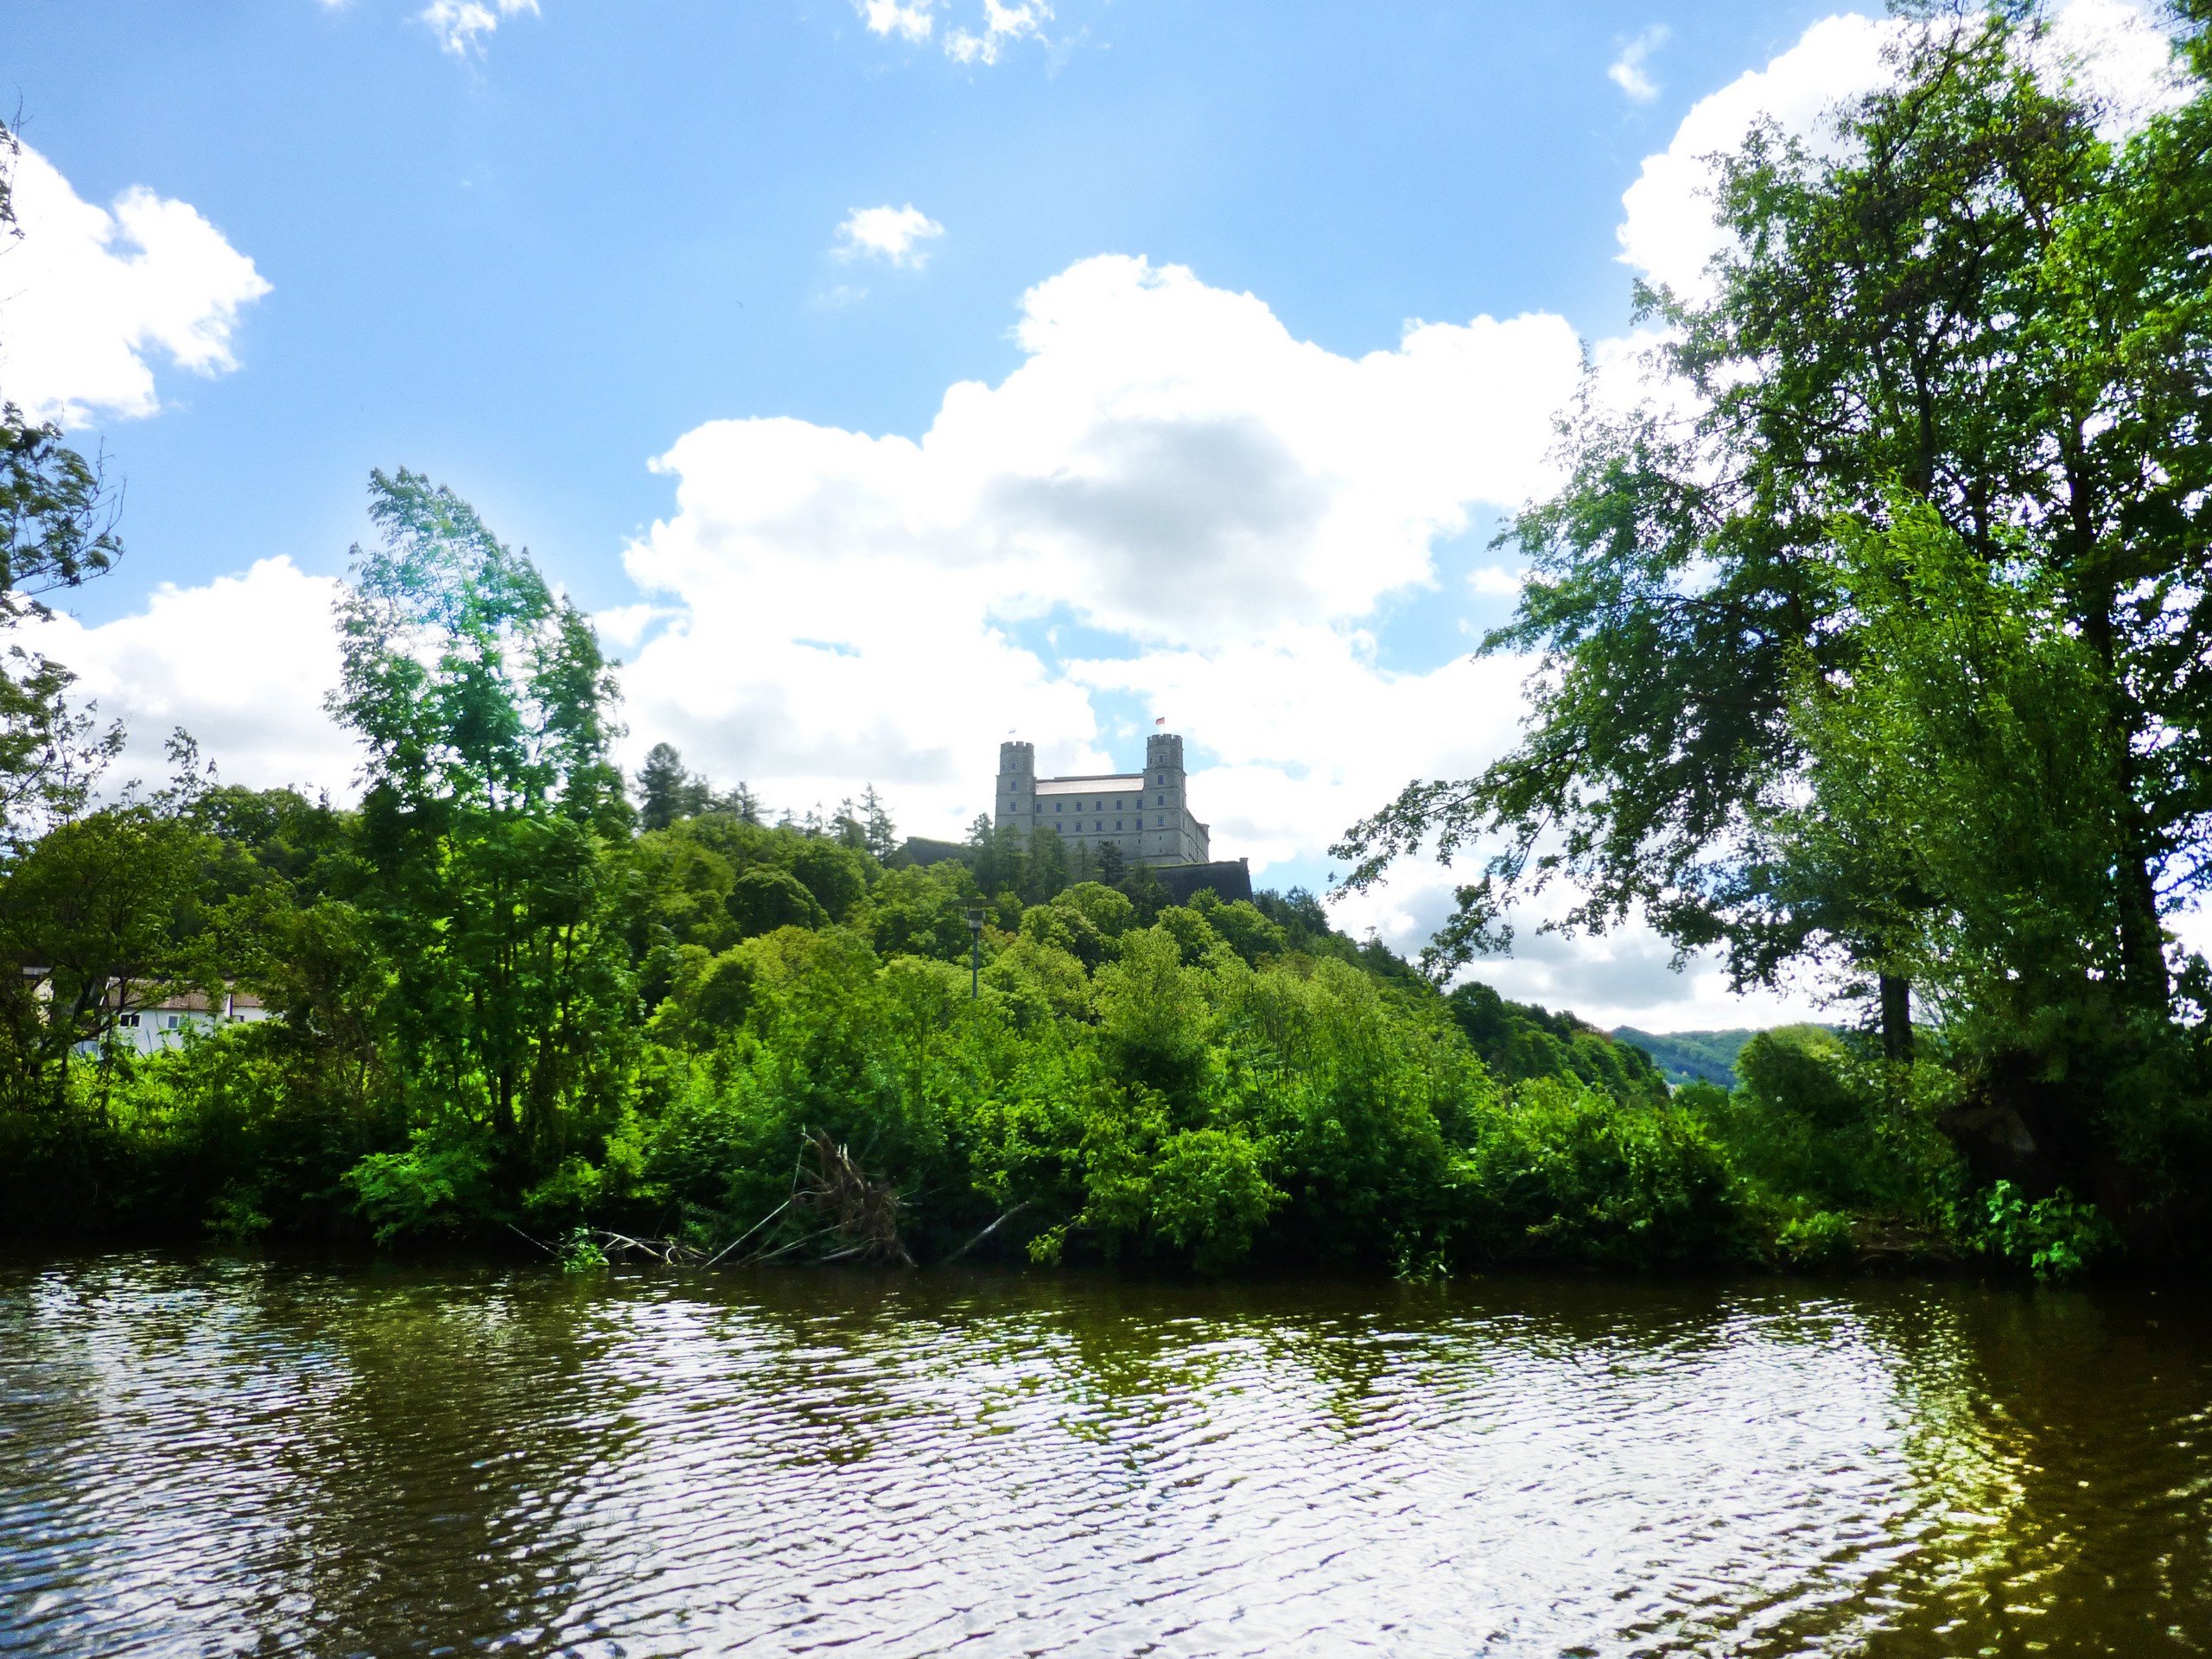 Altmühltal Panorama Trail Tour - Looking at the castle behind the river on the Bavaria walking tour